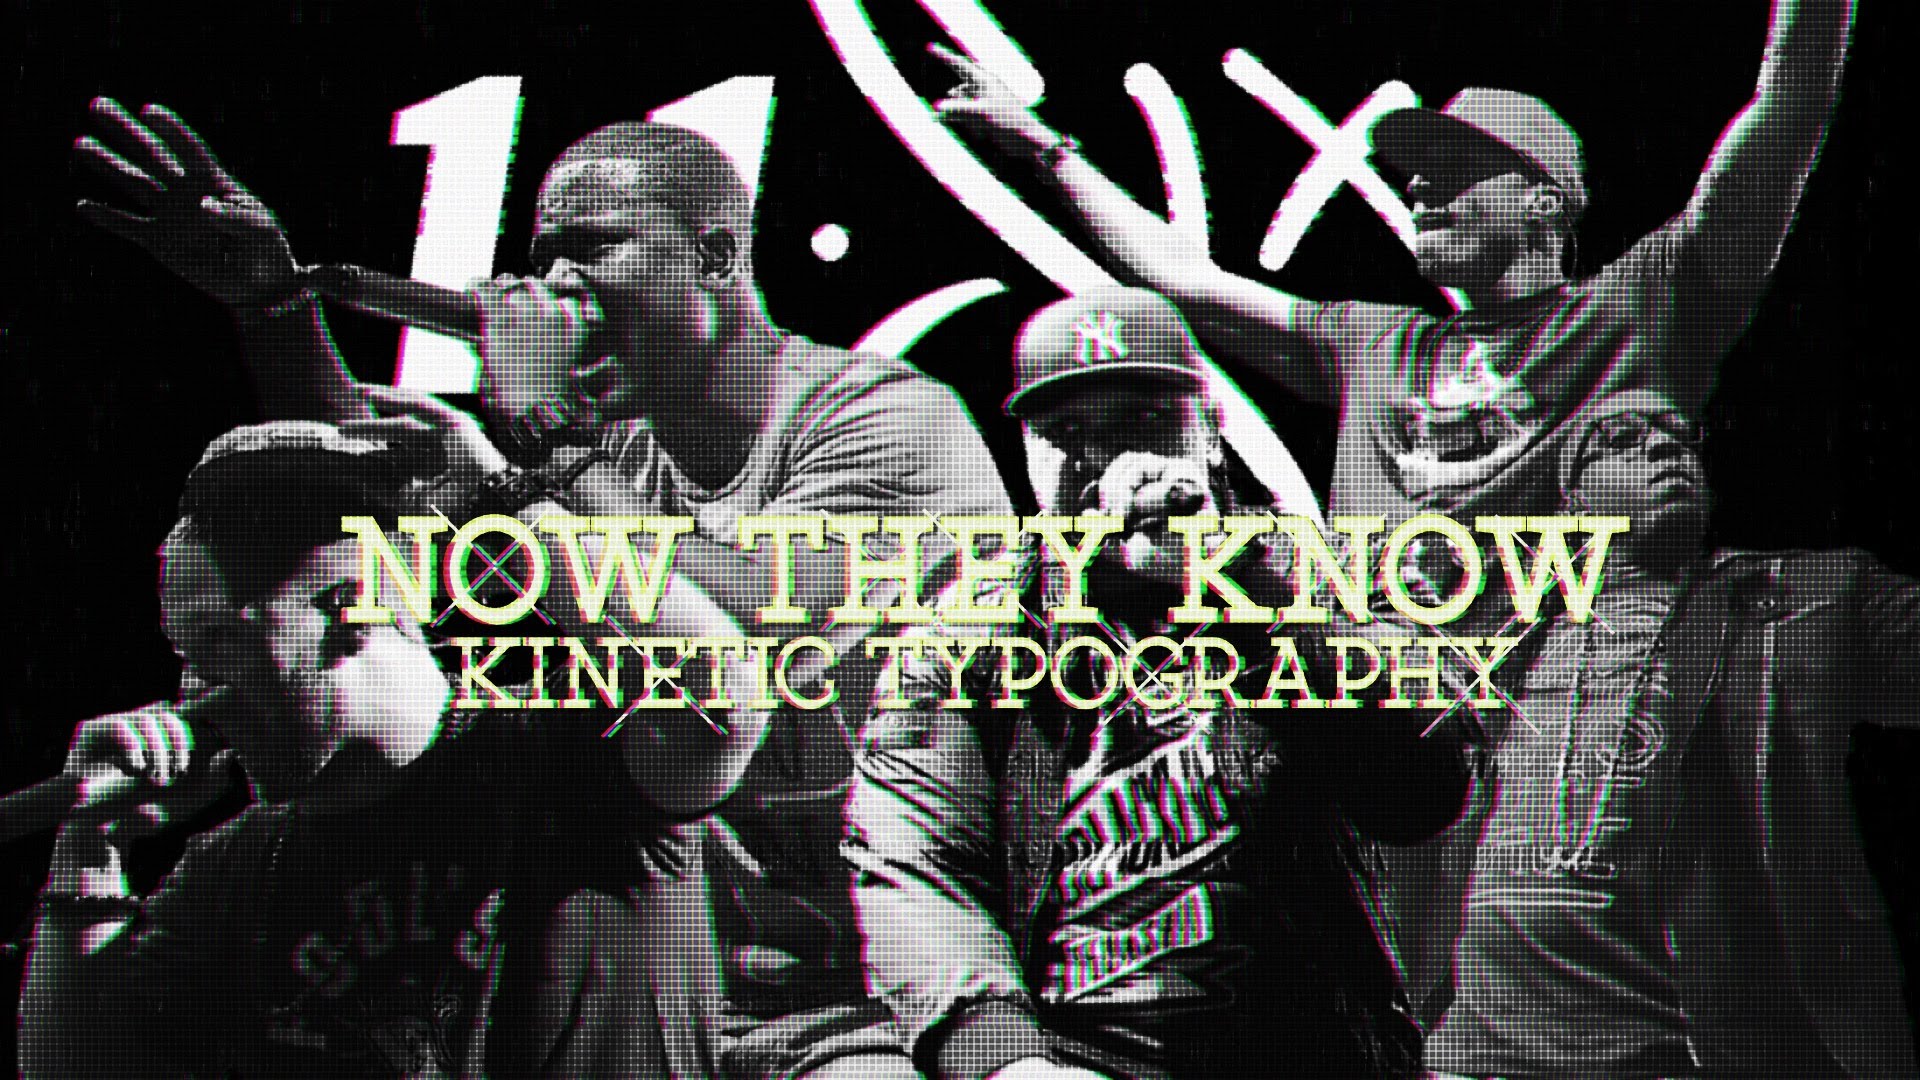 116 Unashamed Wallpaper 116 now they know kinetic